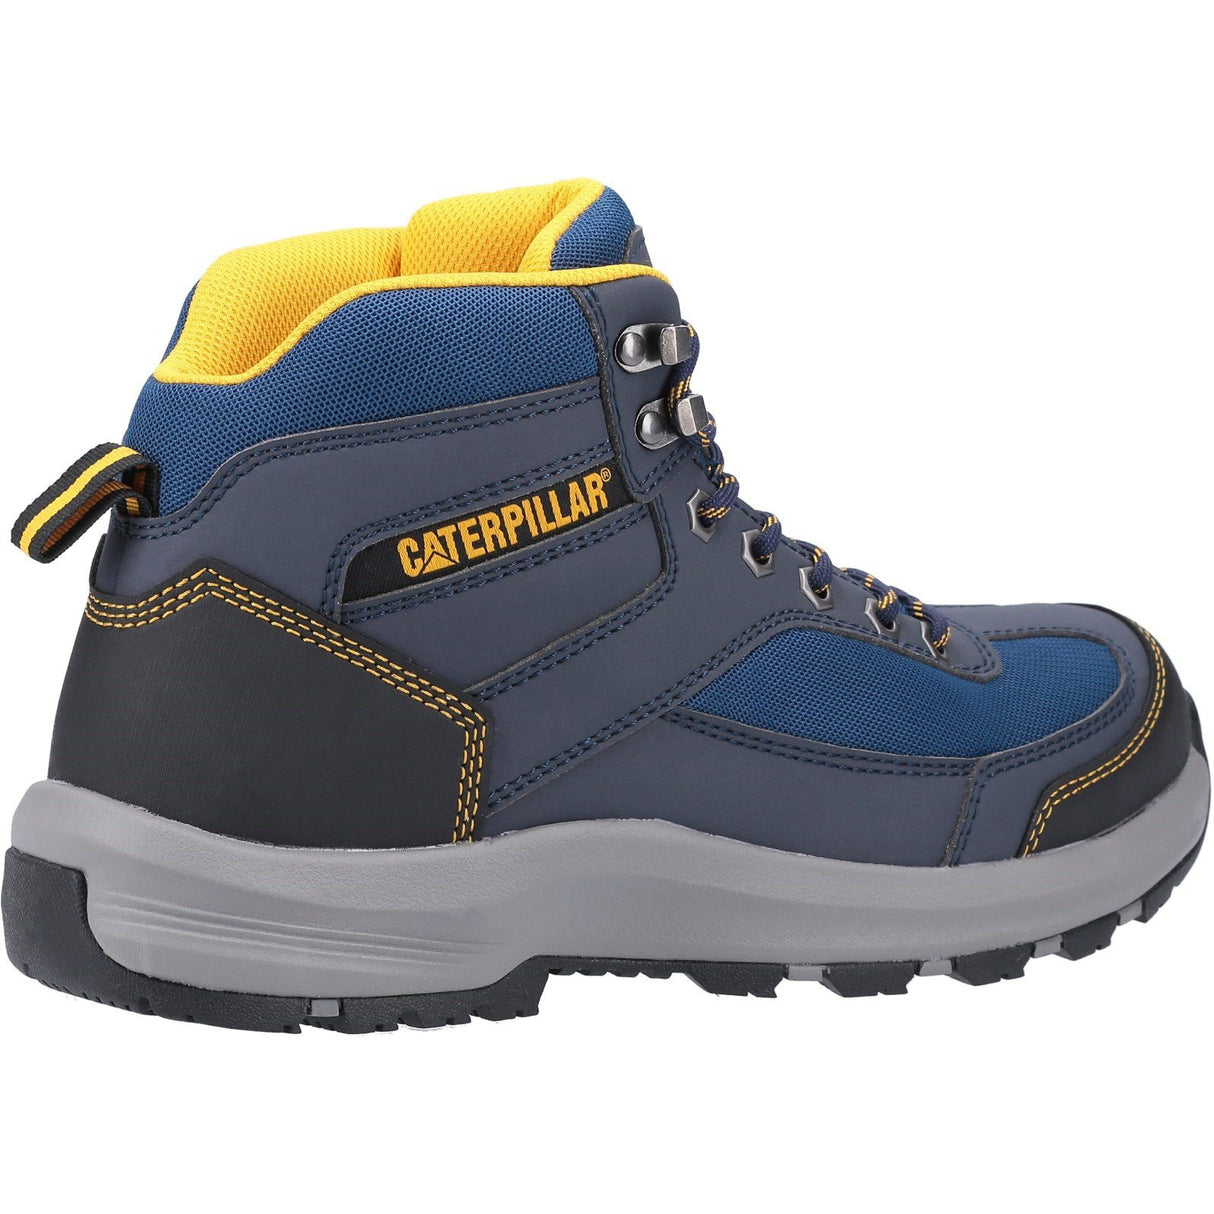 Caterpillar Elmore Mid Safety Boots